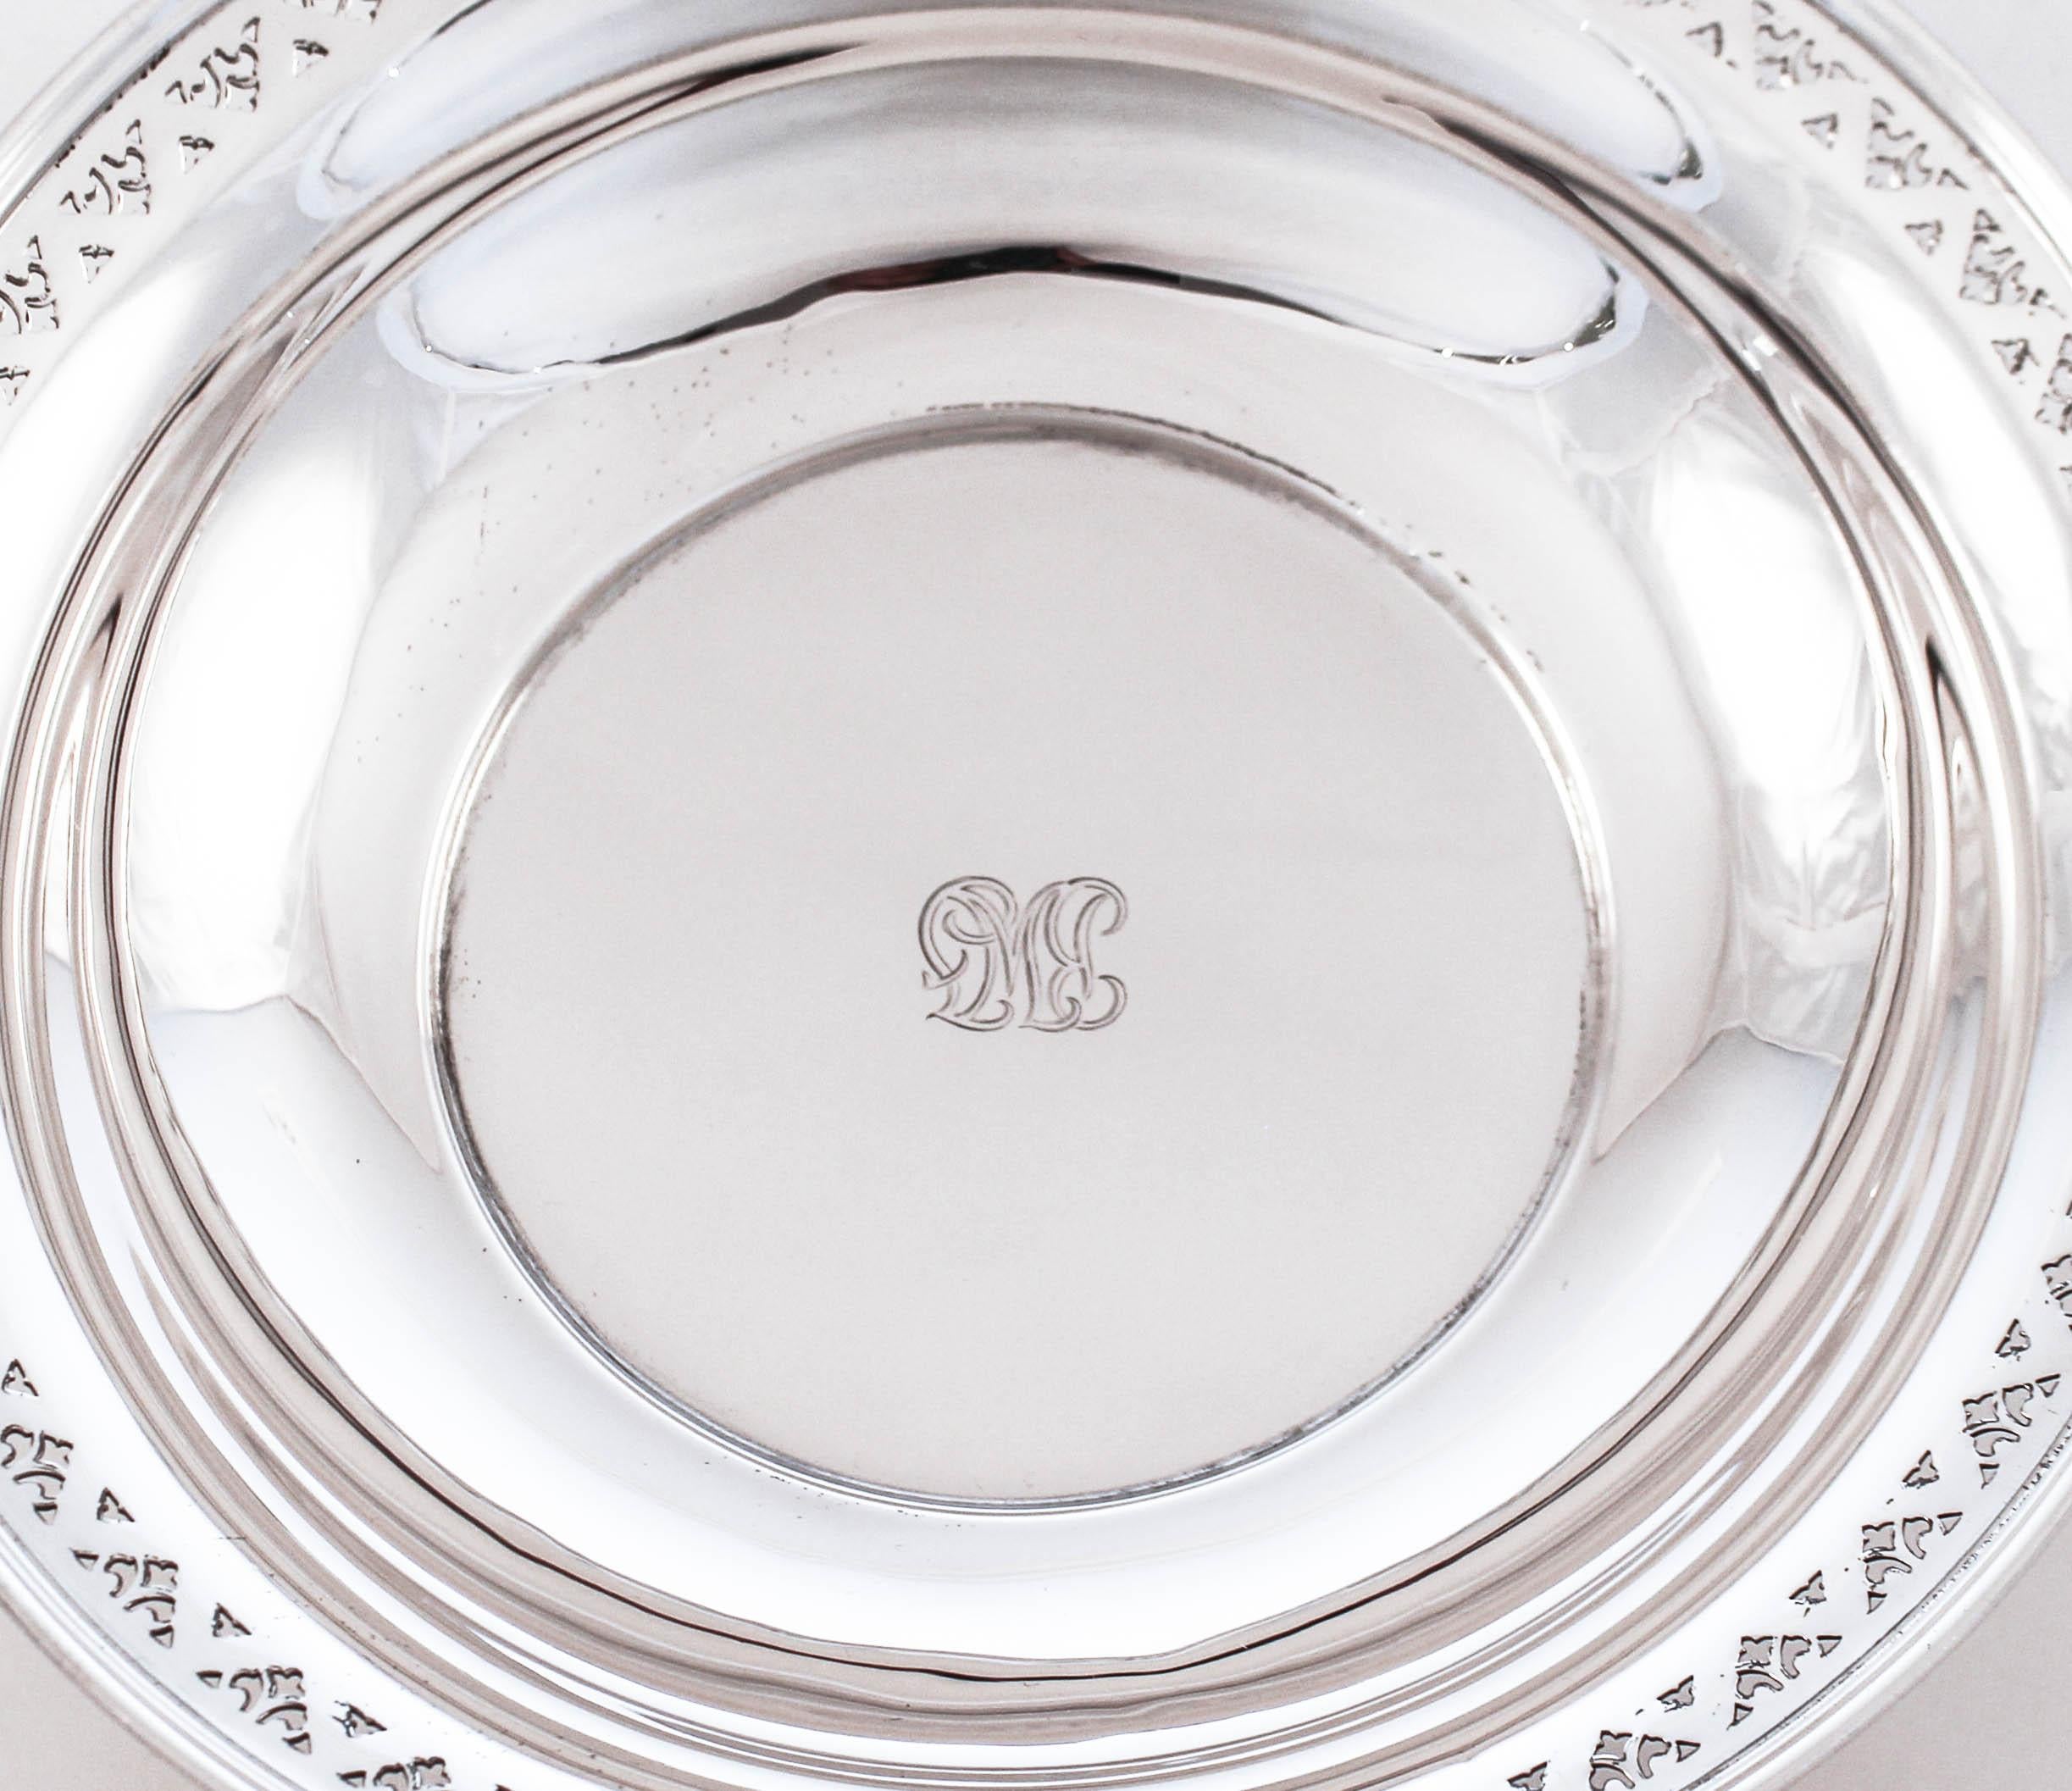 Being offered is a sterling silver bowl by Tiffany & Co. It has a symmetrical cutout pattern going around the edge. It’s a great size for fruit or desserts. In the center there is a hand engraved monogram in the distinctive Tiffany style.